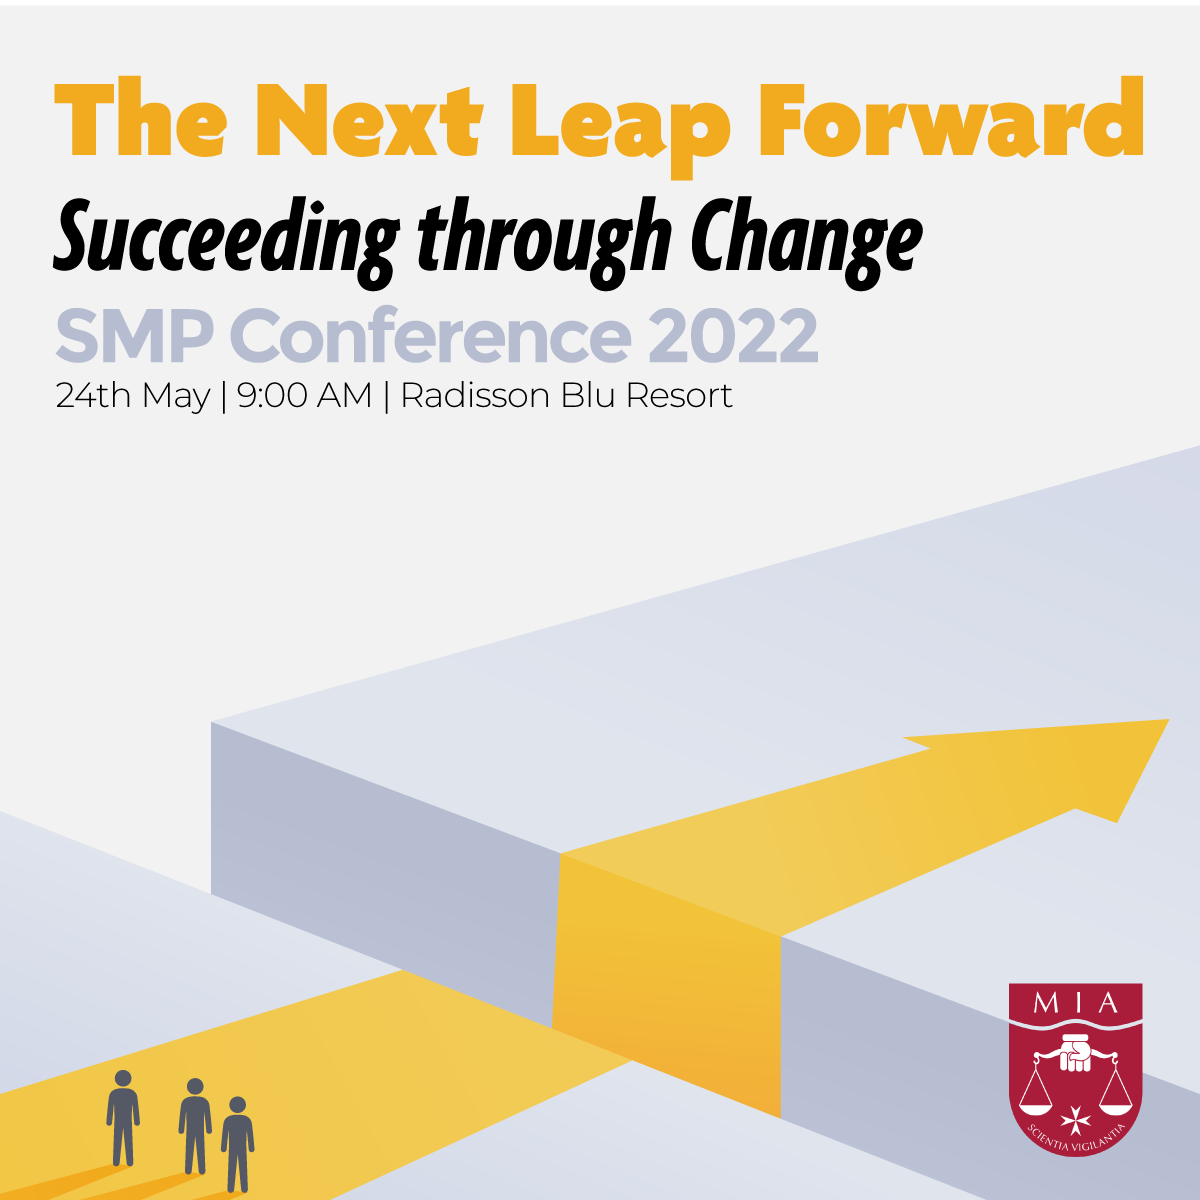 SMP Conference 2022 The Next Leap Forward Succeeding Through Change